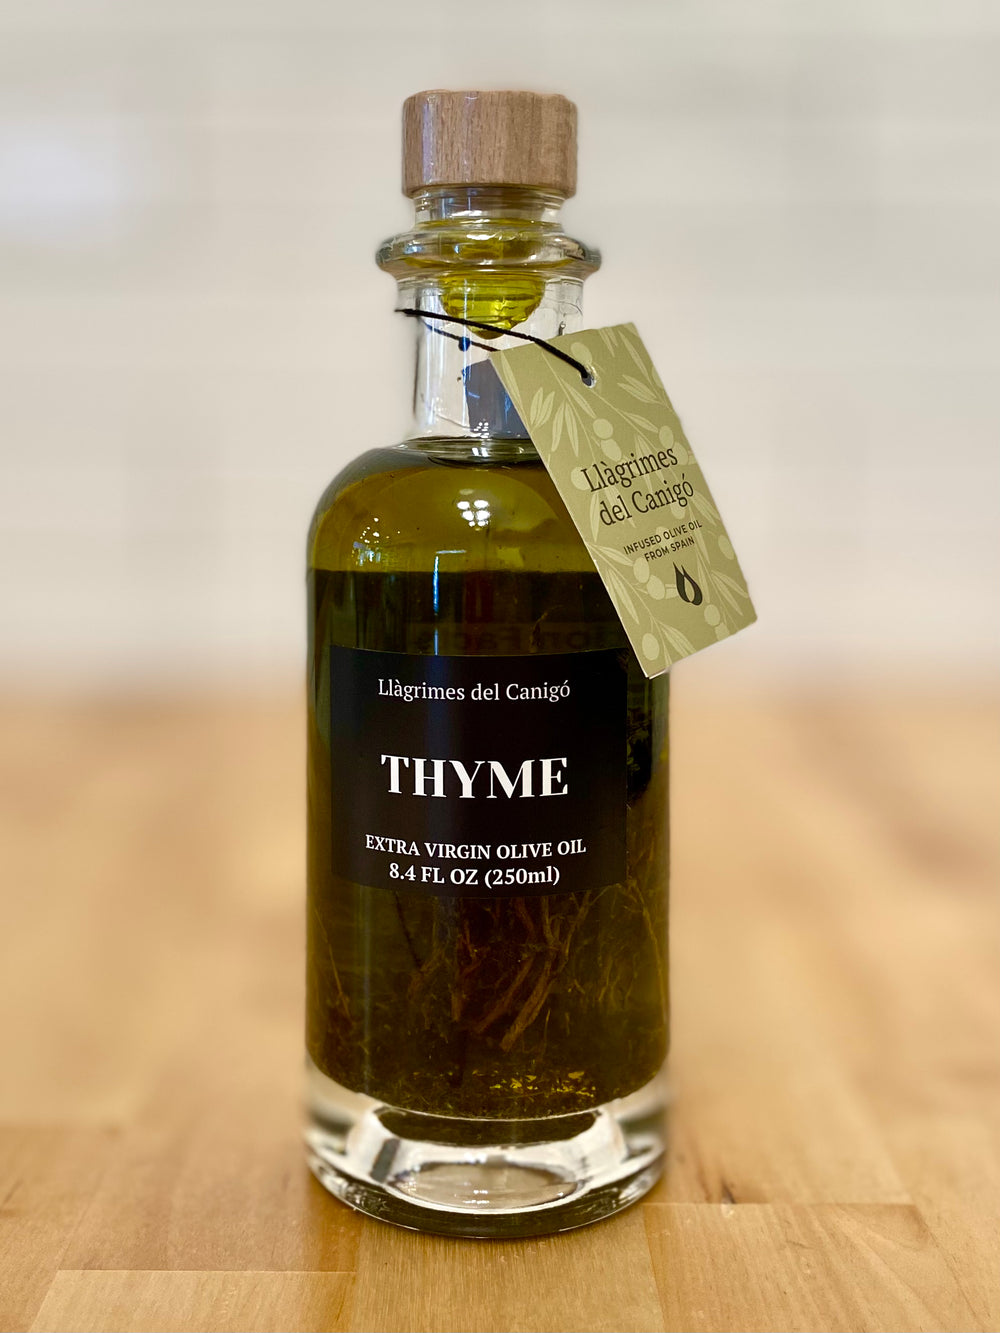 LLÀGRIMES DEL CANIGO - Infused Extra Virgin Olive Oil - Thyme